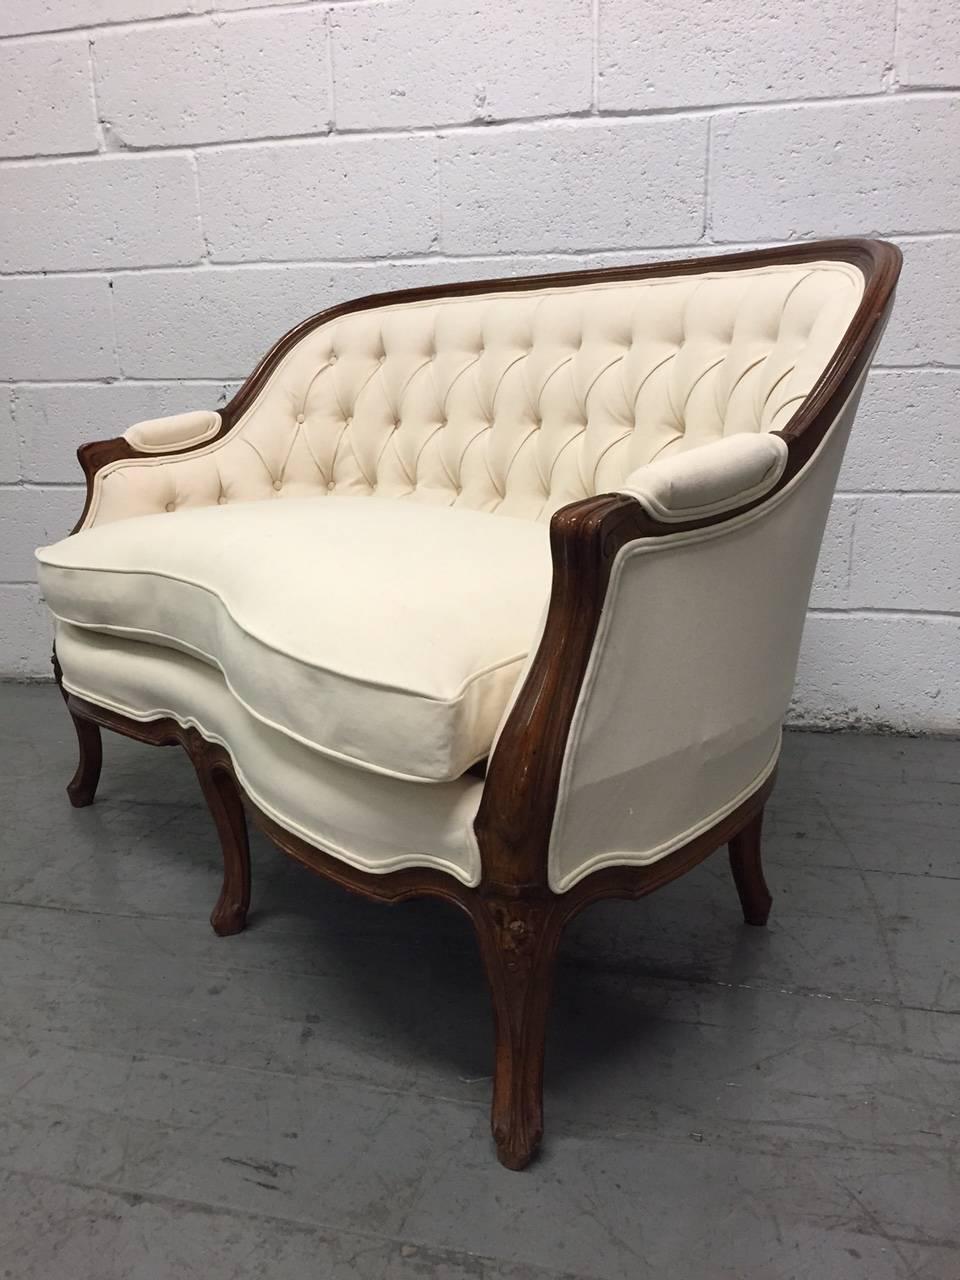 Beautiful French carved frame, tufted loveseat / sofa. Has a goose-down loose cushioned seat.